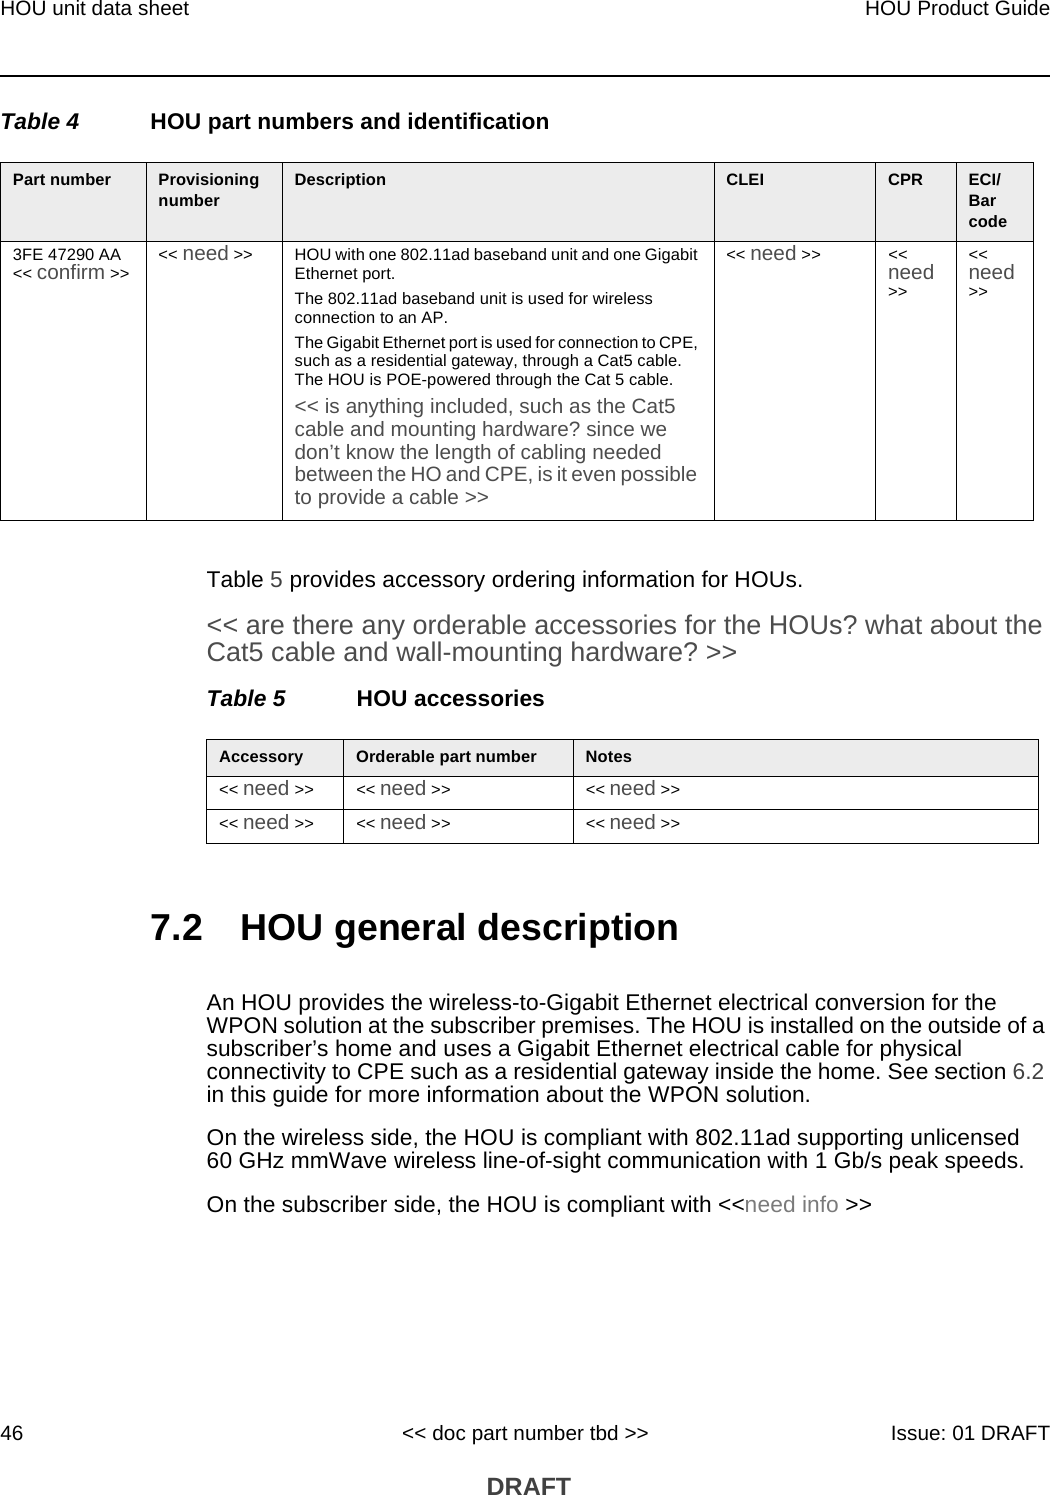 HOU unit data sheet46HOU Product Guide&lt;&lt; doc part number tbd &gt;&gt; Issue: 01 DRAFT DRAFTTable 4 HOU part numbers and identificationTable 5 provides accessory ordering information for HOUs. &lt;&lt; are there any orderable accessories for the HOUs? what about the Cat5 cable and wall-mounting hardware? &gt;&gt;Table 5 HOU accessories7.2 HOU general descriptionAn HOU provides the wireless-to-Gigabit Ethernet electrical conversion for the WPON solution at the subscriber premises. The HOU is installed on the outside of a subscriber’s home and uses a Gigabit Ethernet electrical cable for physical connectivity to CPE such as a residential gateway inside the home. See section 6.2 in this guide for more information about the WPON solution.On the wireless side, the HOU is compliant with 802.11ad supporting unlicensed 60 GHz mmWave wireless line-of-sight communication with 1 Gb/s peak speeds.On the subscriber side, the HOU is compliant with &lt;&lt;need info &gt;&gt;Part number Provisioning number Description CLEI CPR ECI/ Bar code3FE 47290 AA &lt;&lt; confirm &gt;&gt; &lt;&lt; need &gt;&gt; HOU with one 802.11ad baseband unit and one Gigabit Ethernet port.The 802.11ad baseband unit is used for wireless connection to an AP.The Gigabit Ethernet port is used for connection to CPE, such as a residential gateway, through a Cat5 cable. The HOU is POE-powered through the Cat 5 cable.&lt;&lt; is anything included, such as the Cat5 cable and mounting hardware? since we don’t know the length of cabling needed between the HO and CPE, is it even possible to provide a cable &gt;&gt;&lt;&lt; need &gt;&gt; &lt;&lt; need &gt;&gt;&lt;&lt; need &gt;&gt;Accessory Orderable part number Notes&lt;&lt; need &gt;&gt; &lt;&lt; need &gt;&gt; &lt;&lt; need &gt;&gt;&lt;&lt; need &gt;&gt; &lt;&lt; need &gt;&gt; &lt;&lt; need &gt;&gt;